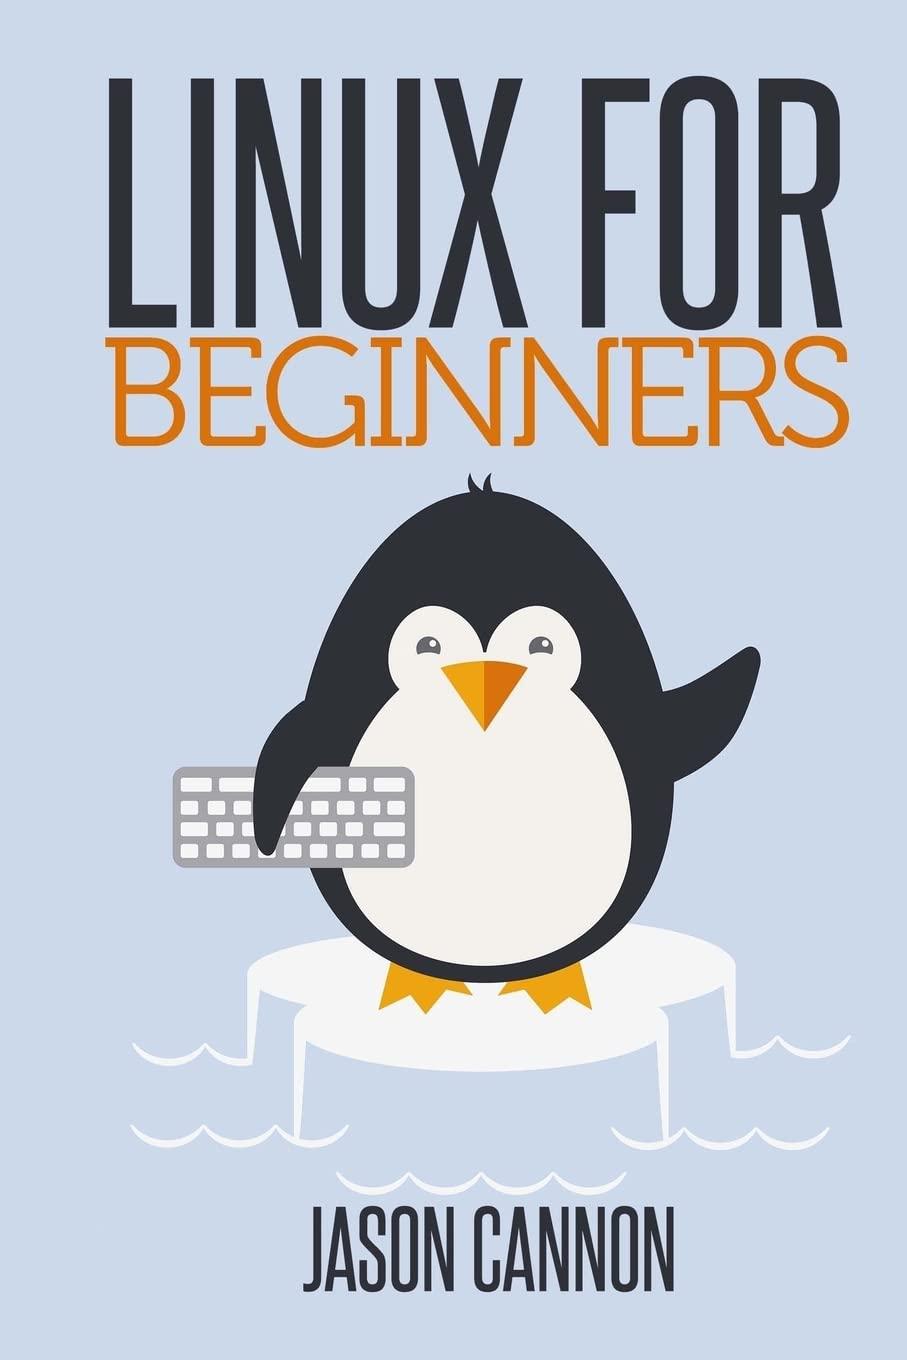 linux for beginners 1st edition jason cannon 1496145097, 978-1496145093